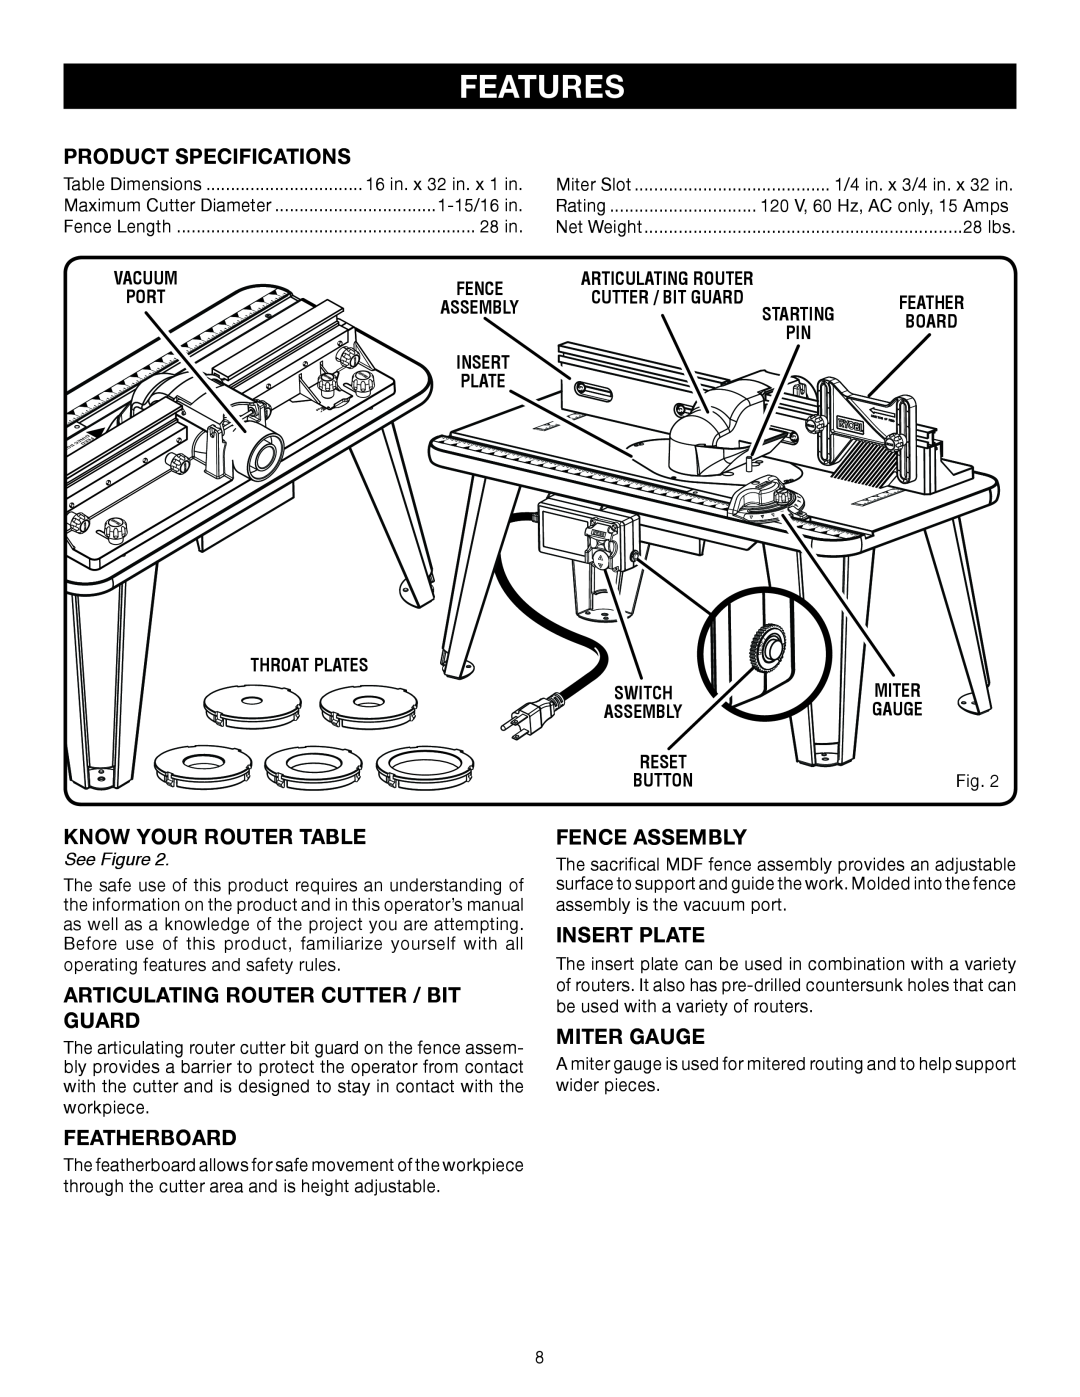 Ryobi A25RT02 Features, Product Specifications, Know Your Router Table, Articulating Router Cutter / Bit Guard, See Figure 